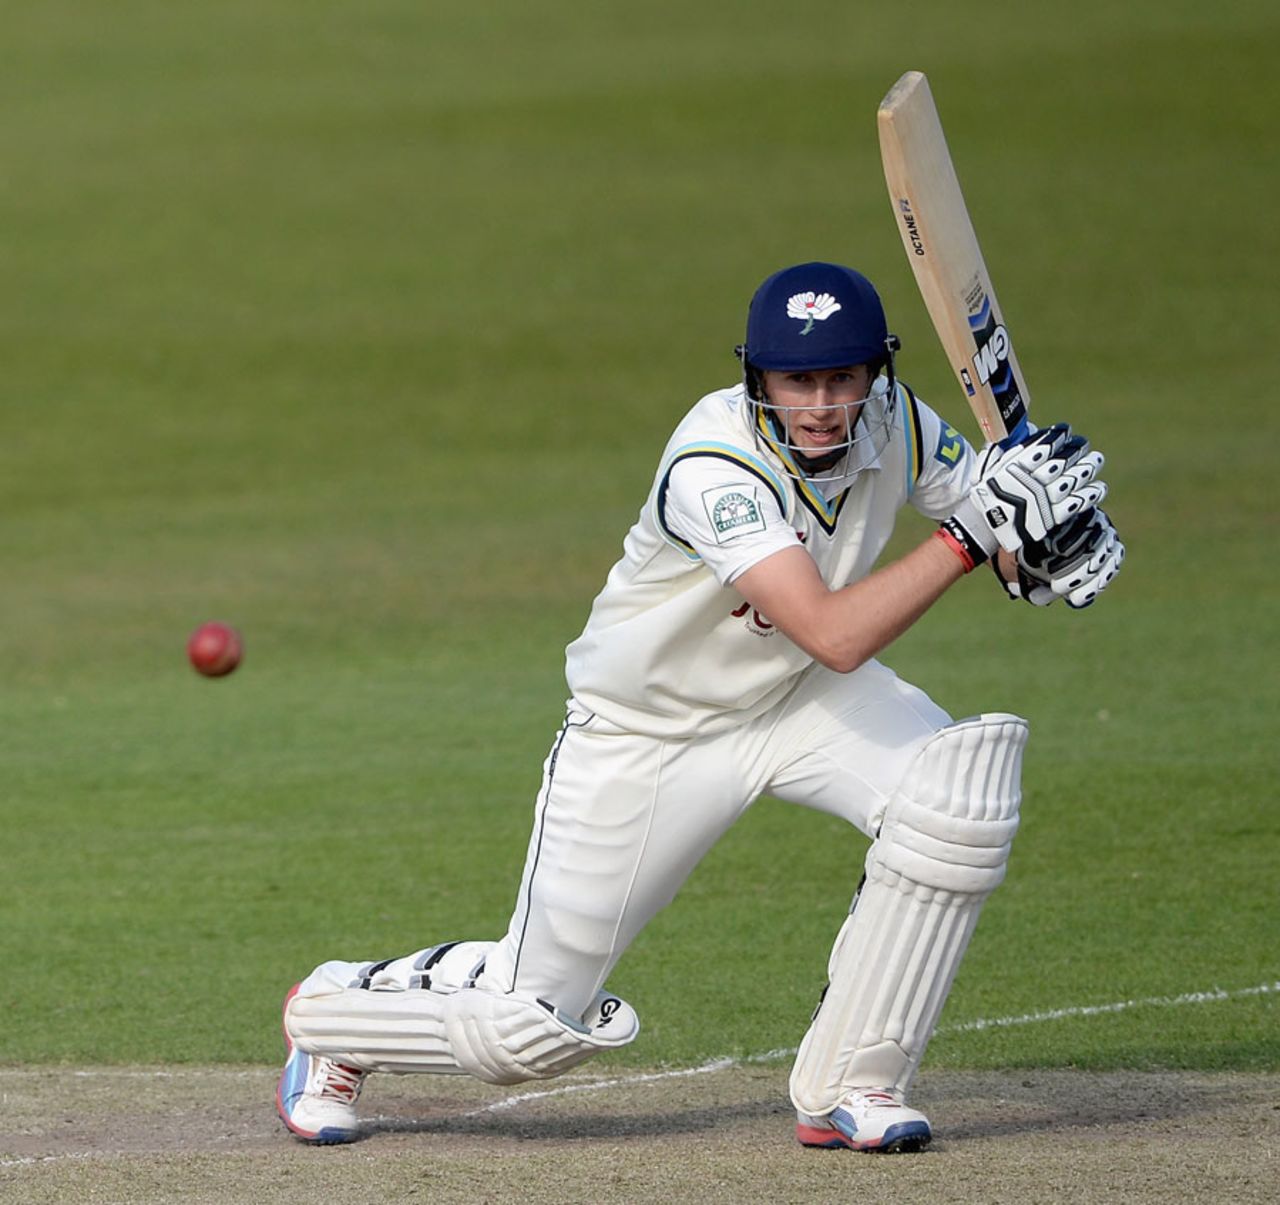 Joe Root continued his form from his match-winning hundred against Durham, Yorkshire v Derbyshire, County Championship, Division One, Headingley, 2nd day, April 30, 2013